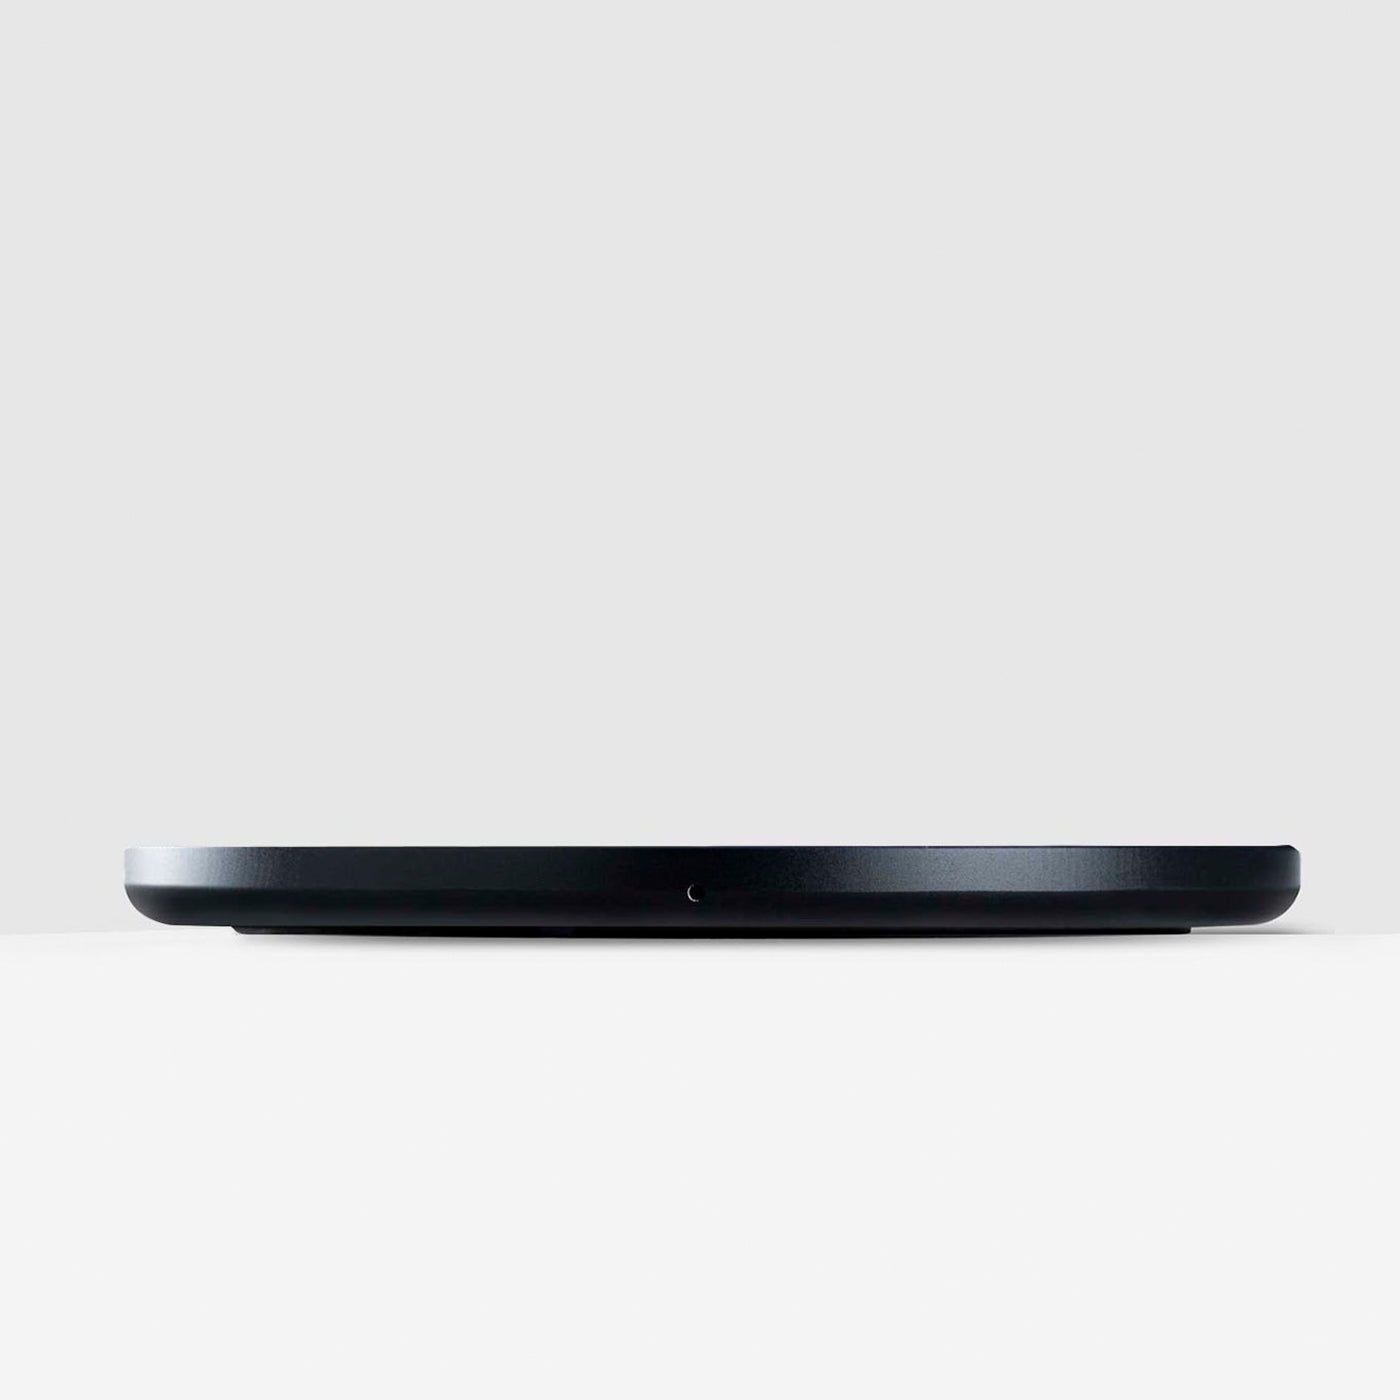 CARBON BLACK Solo Wireless Charger - Vue alternative 2